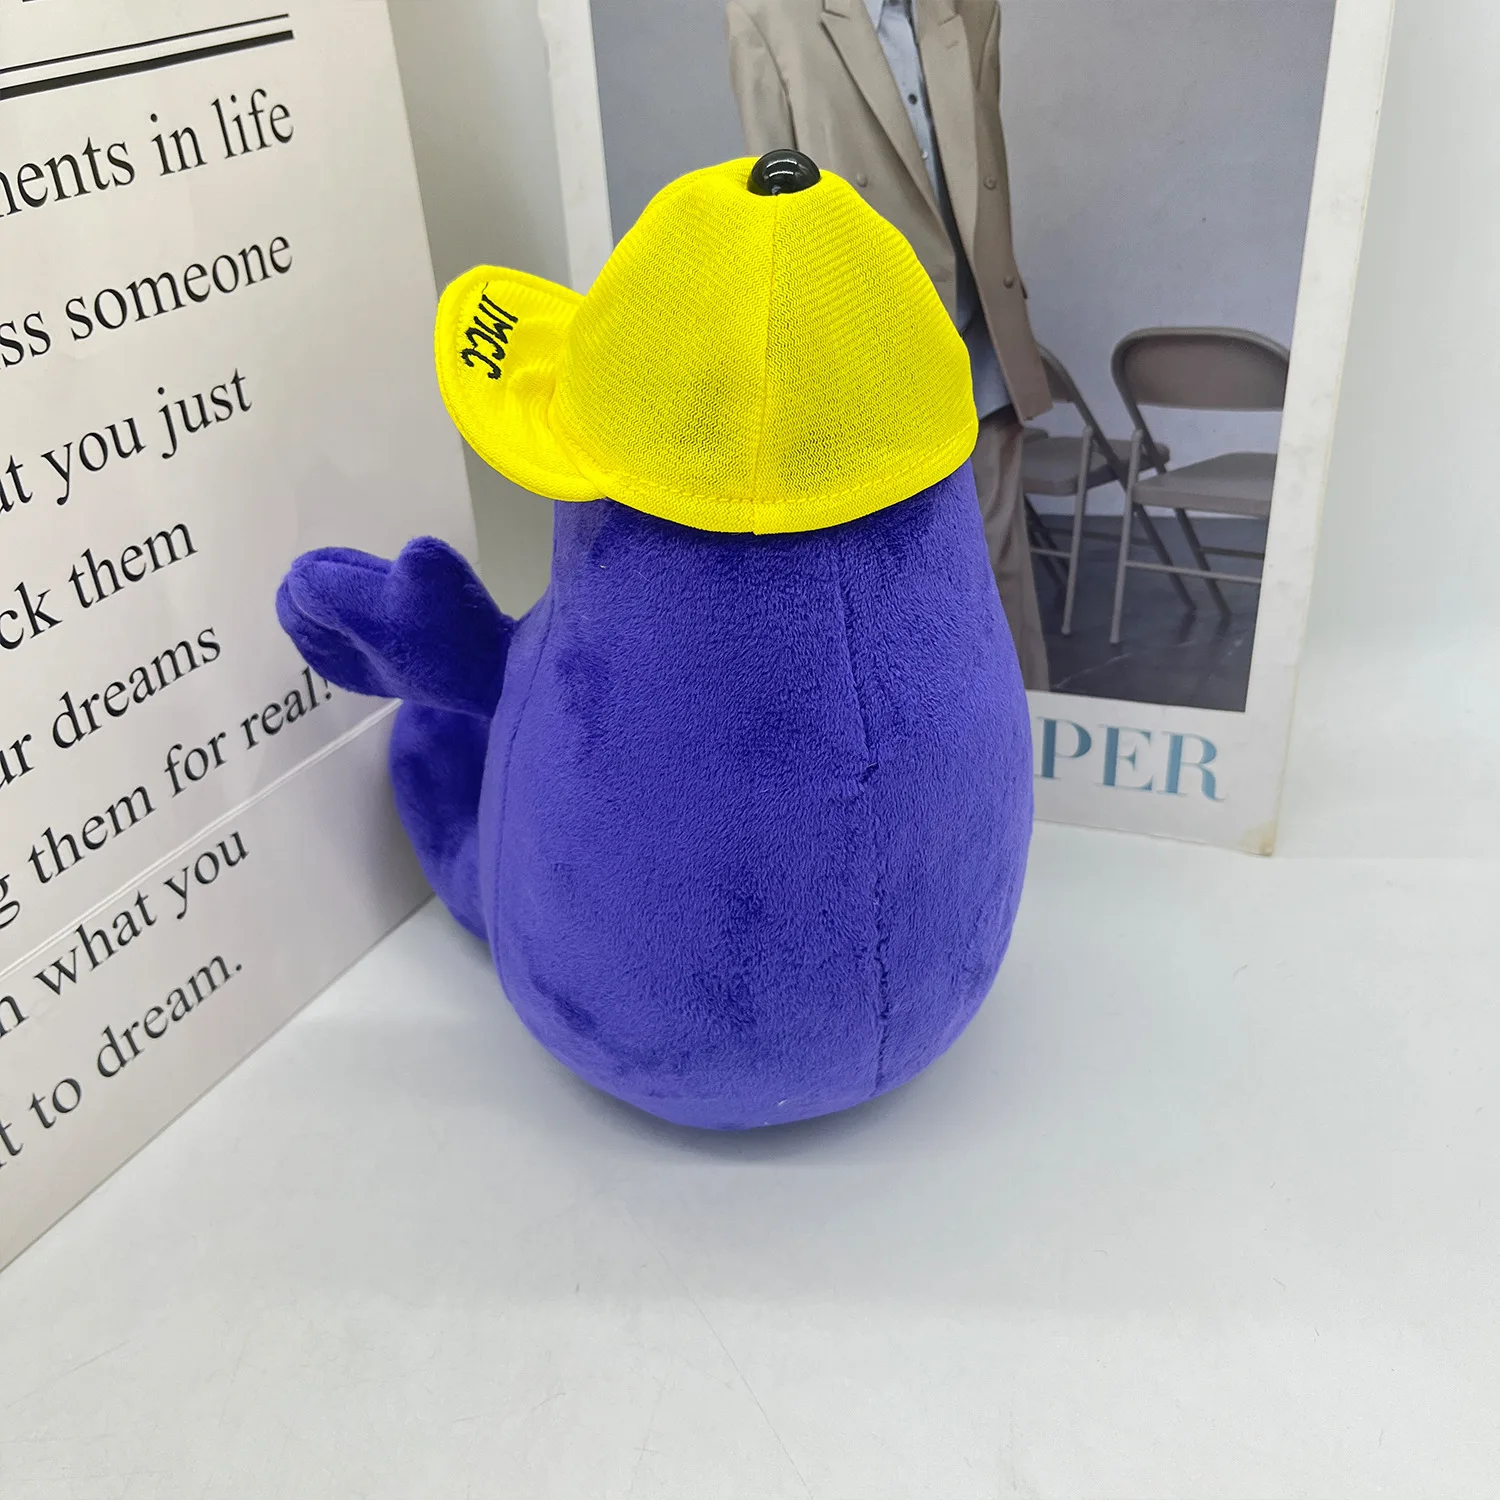 Sd76a203043634665a55830ee734bf575A - Grimace Plush